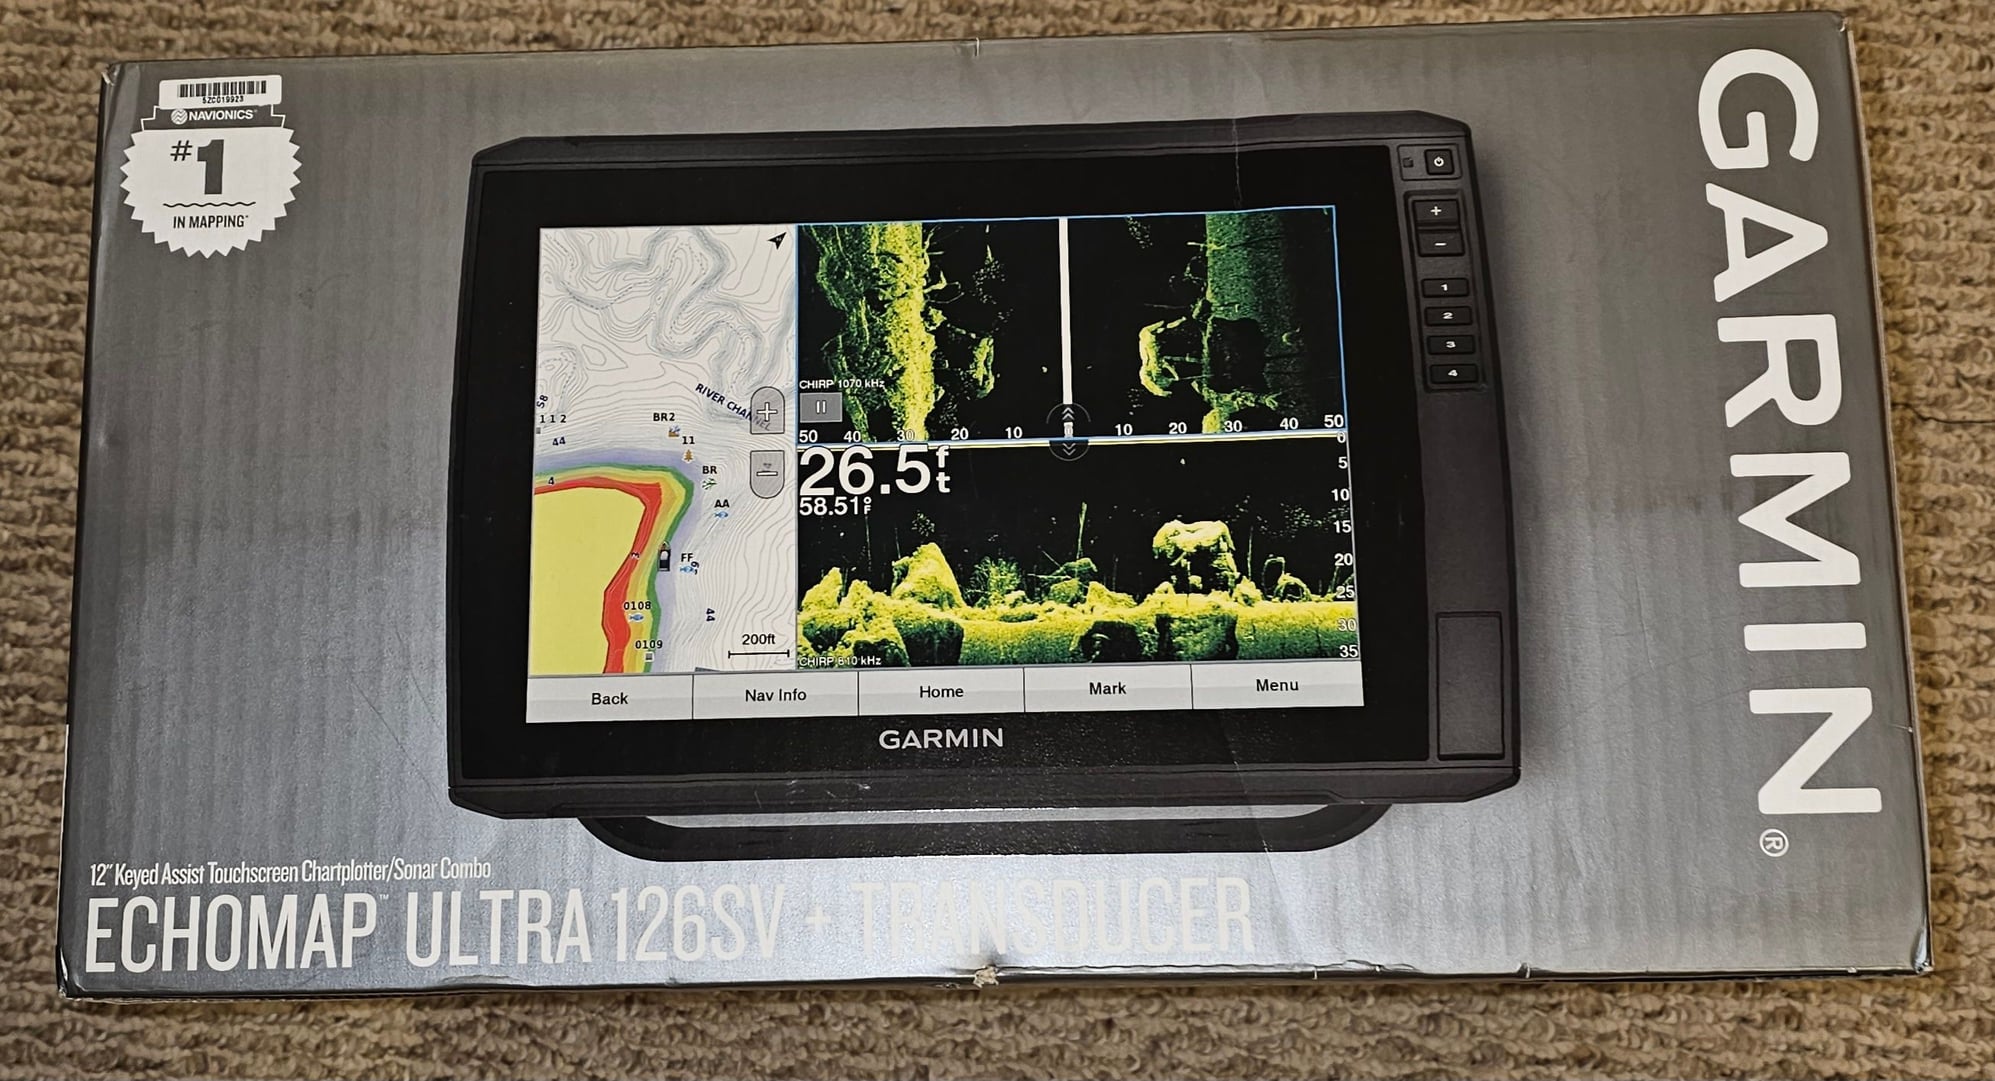 Garmin echomap ultra 126sv wit Gt56 - The Hull Truth - Boating and